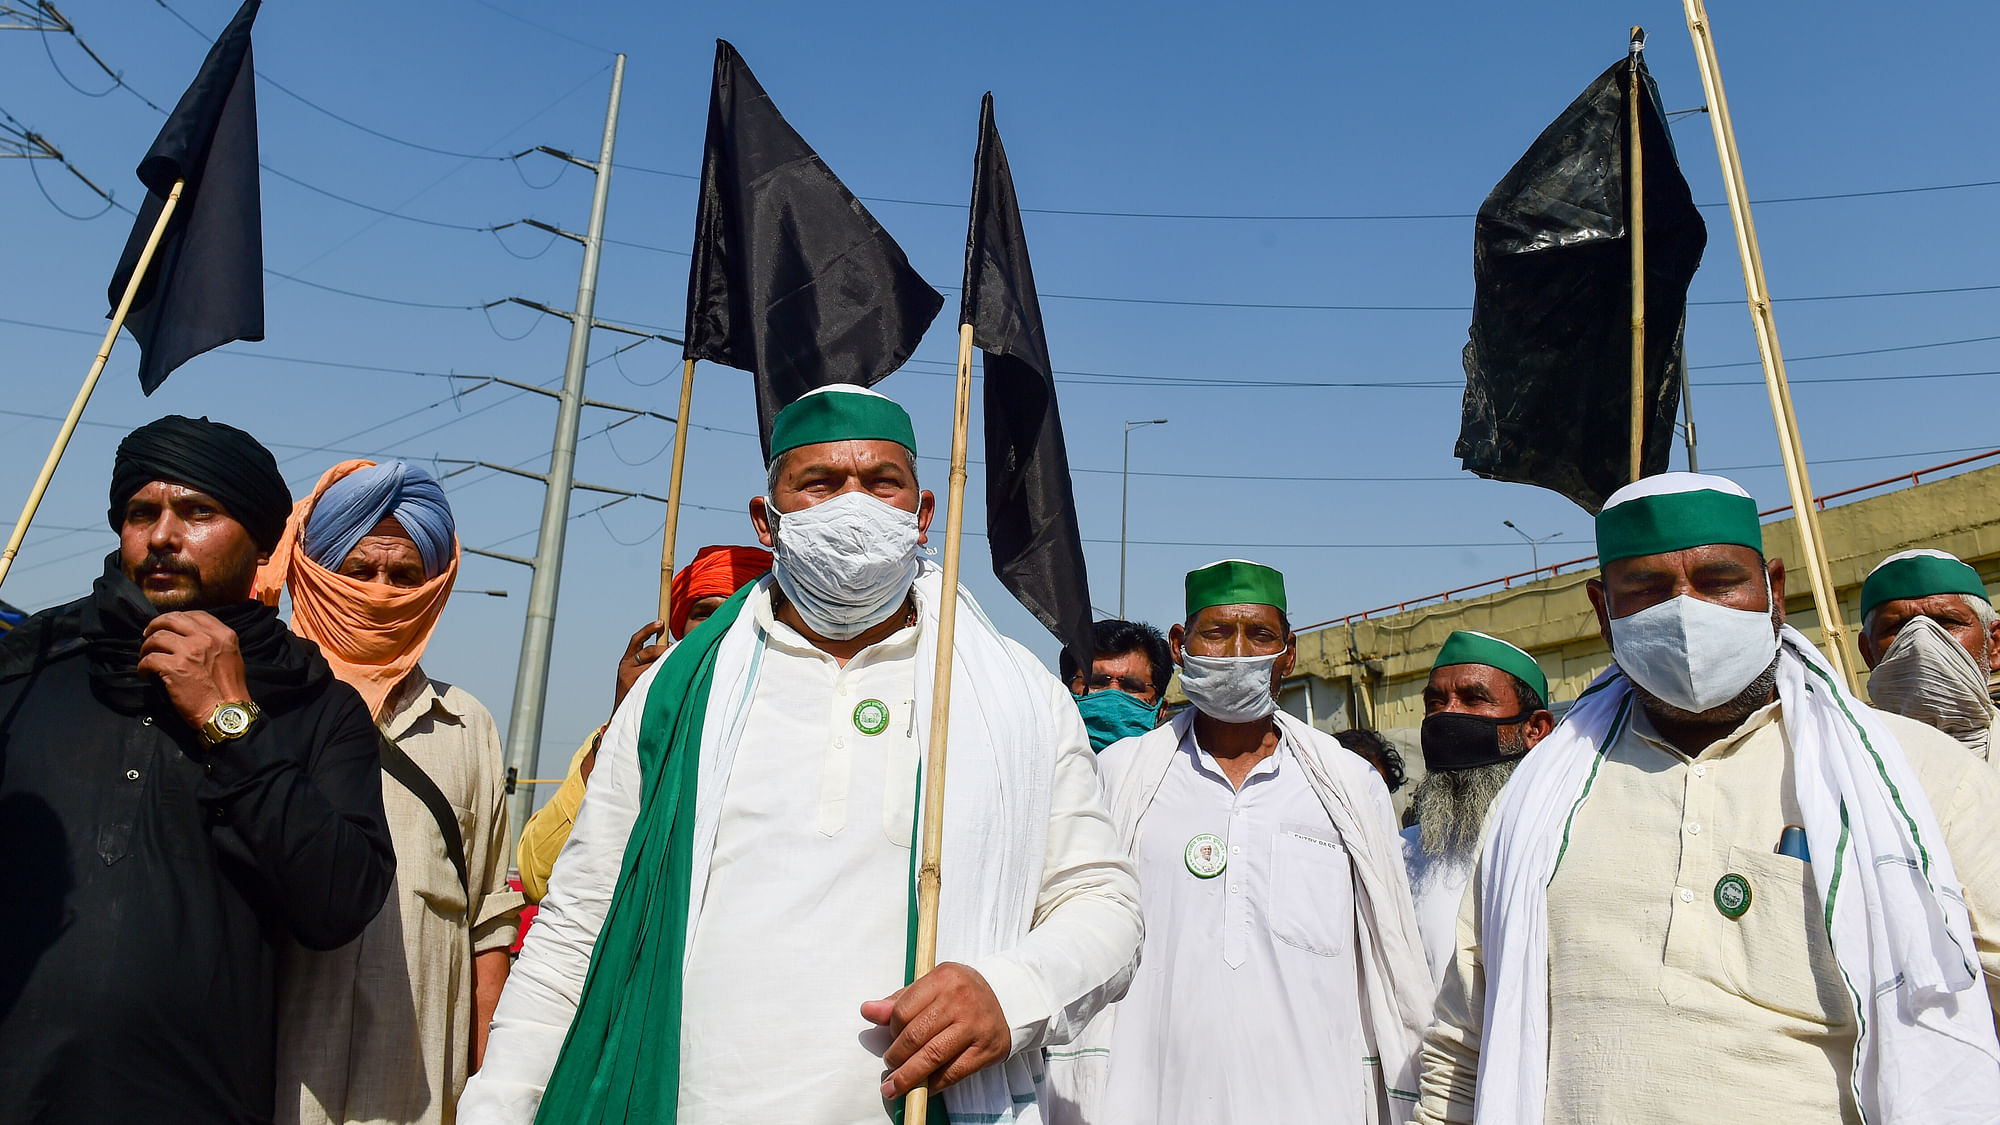 BKU leader Rakesh Tikait, with supporters and farmers, protests with black flags against farm laws, at Ghazipur border in New Delhi, Wednesday, 26 May 2021.